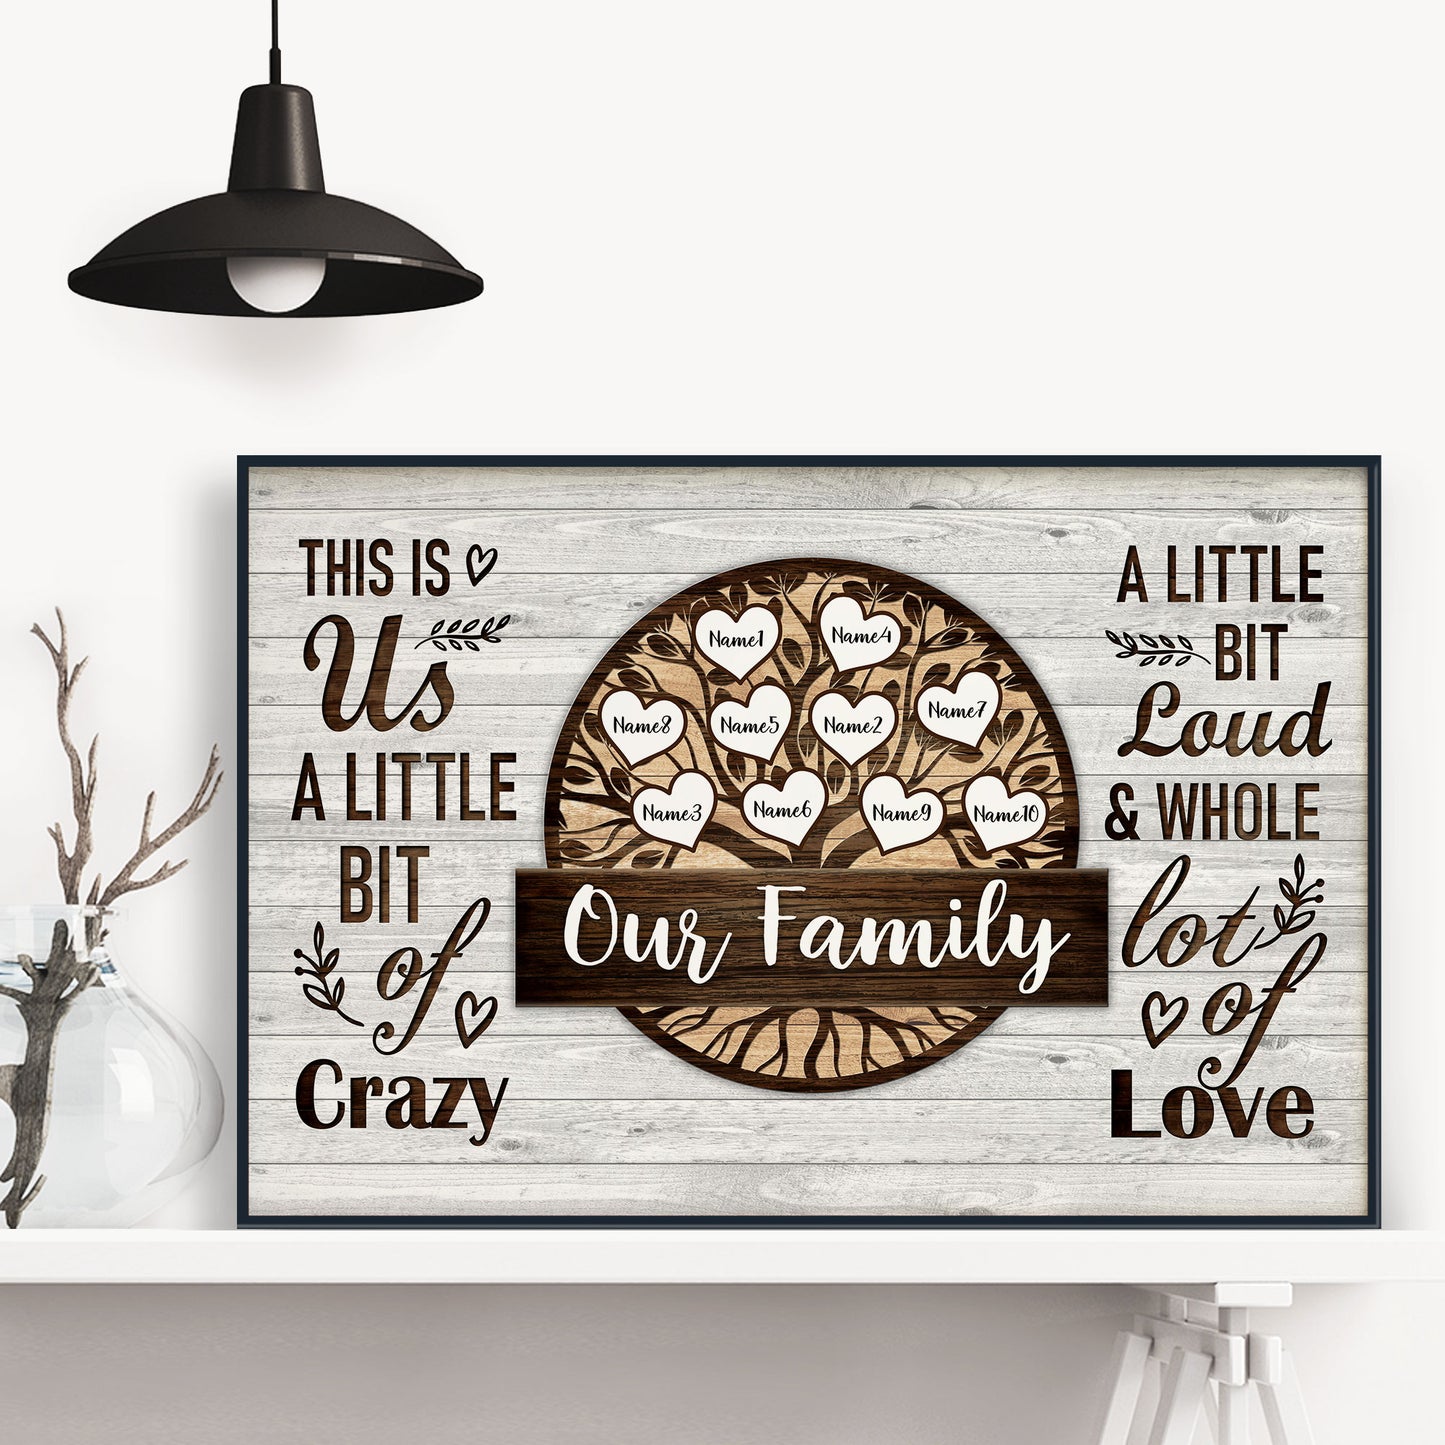 This Is Us A Little Bit Of Crazy, Family Custom Canvas & Poster, Gift For Family